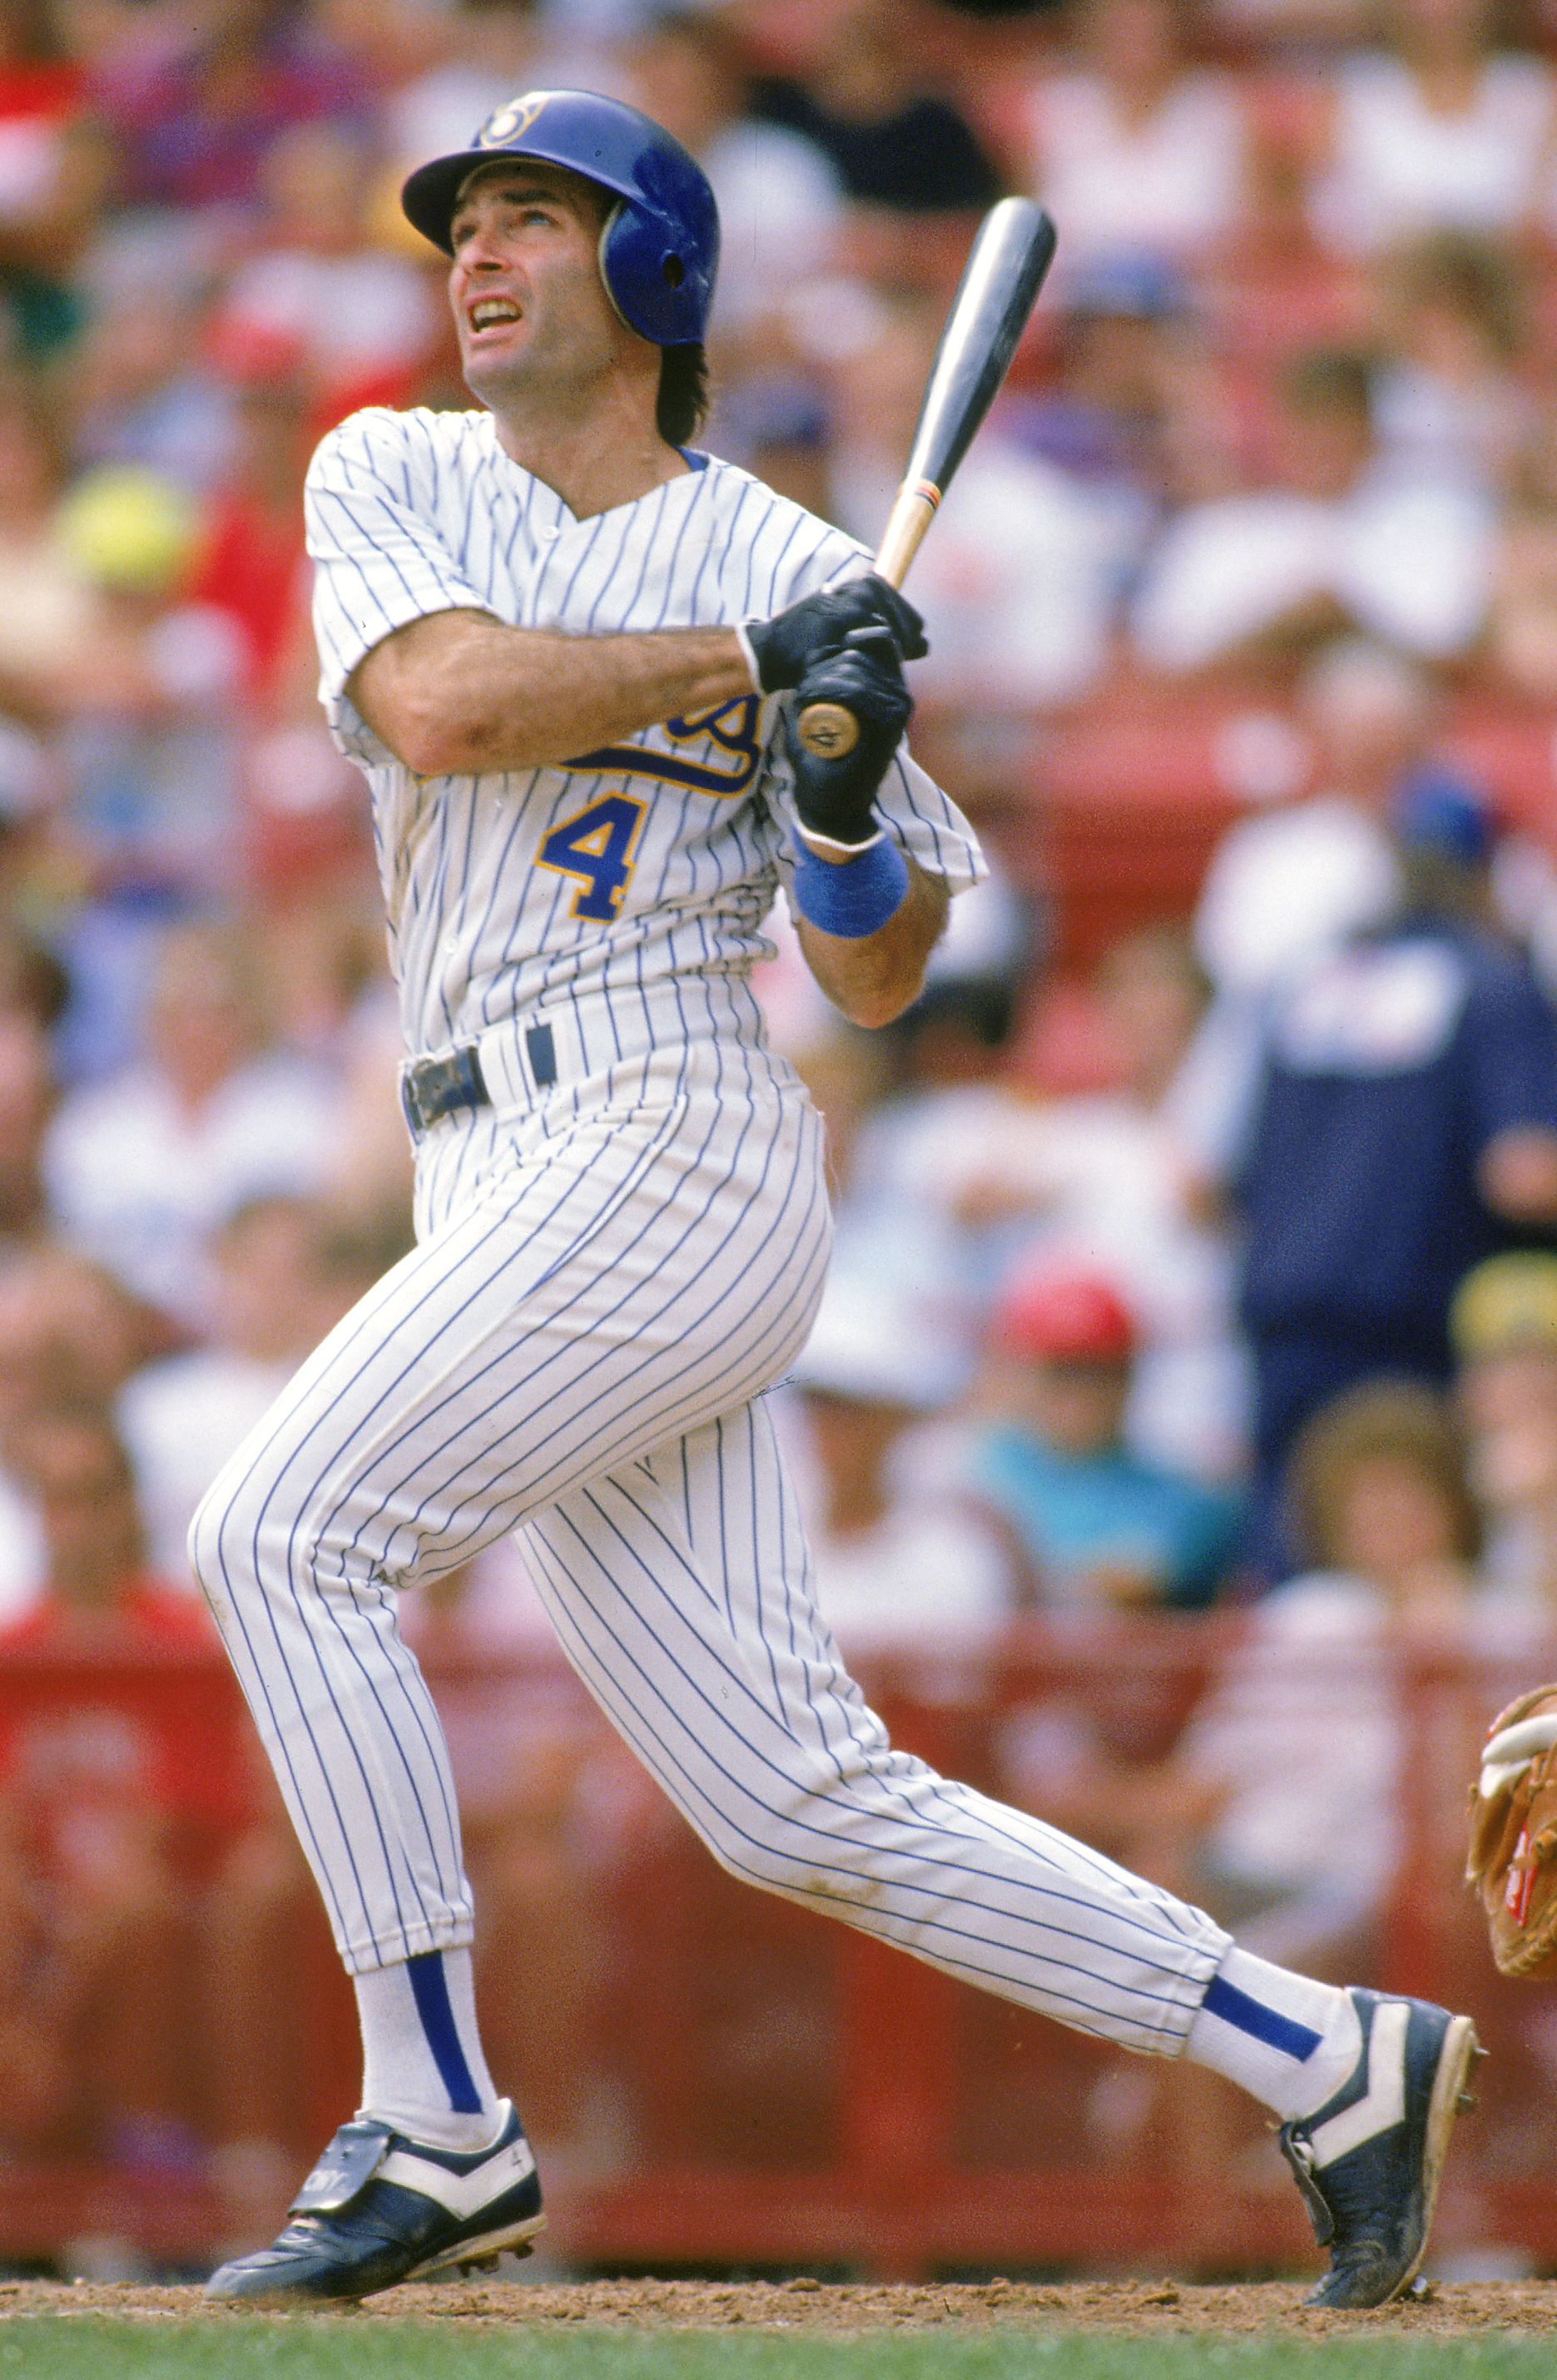 Retro Baseball 101 - Paul Molitor is the only player in MLB history with  200+ home runs, 100+ triples, and 500+ stolen bases. Via  Baseball-Reference.com 📸 Pinterest